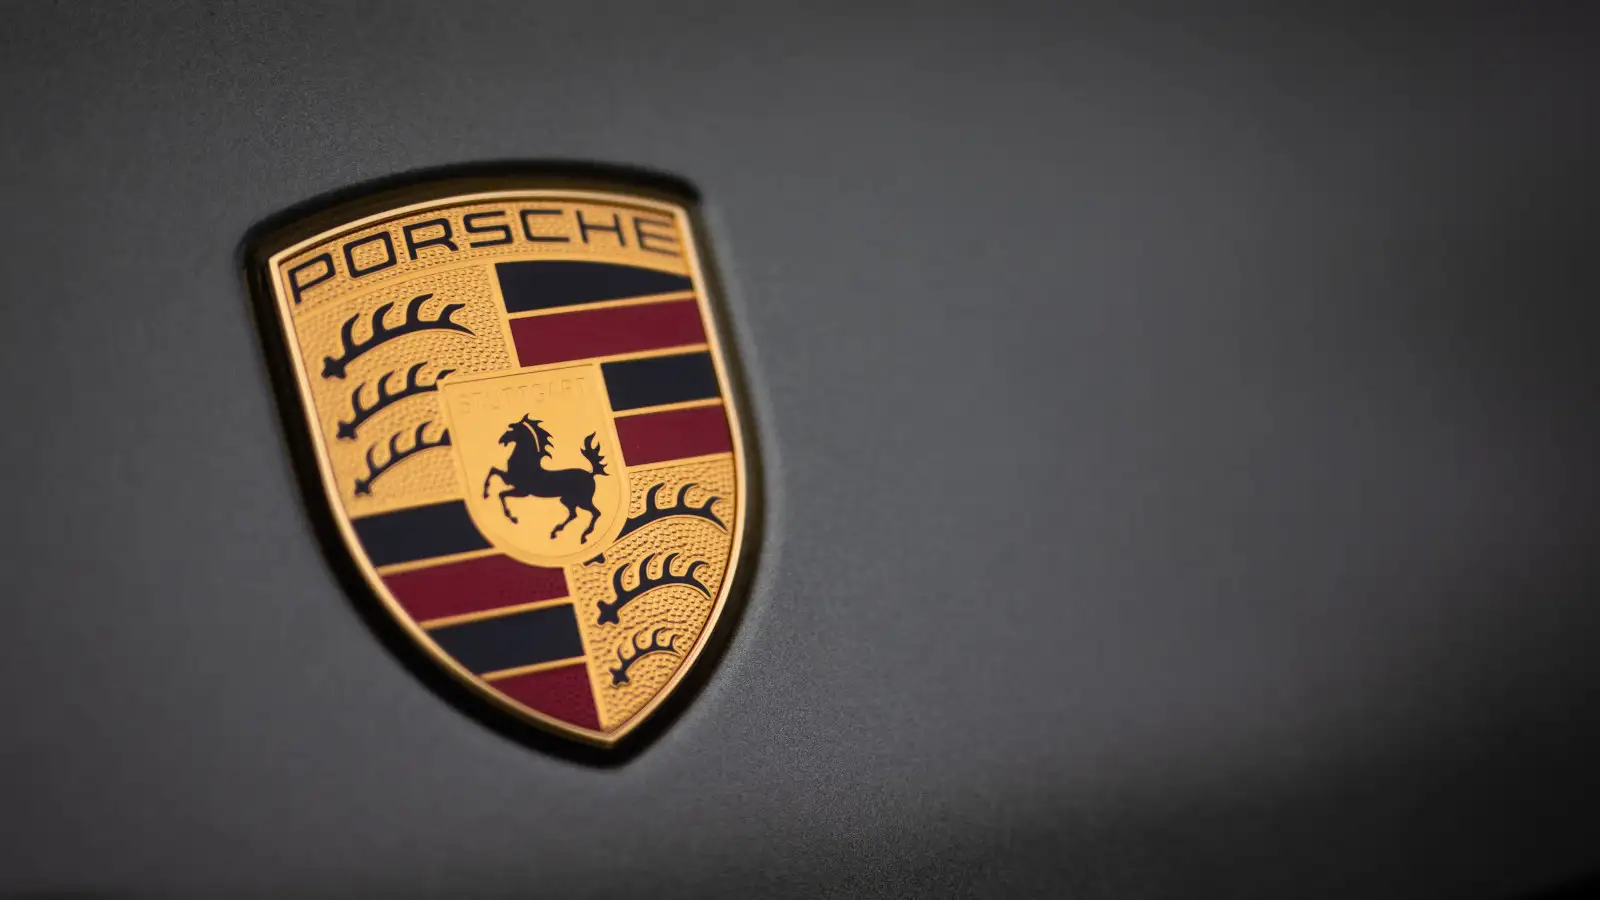 The Porsche logo is seen on a car at the company's headquarters in Stuttgart-Zuffenhausen, Germany.